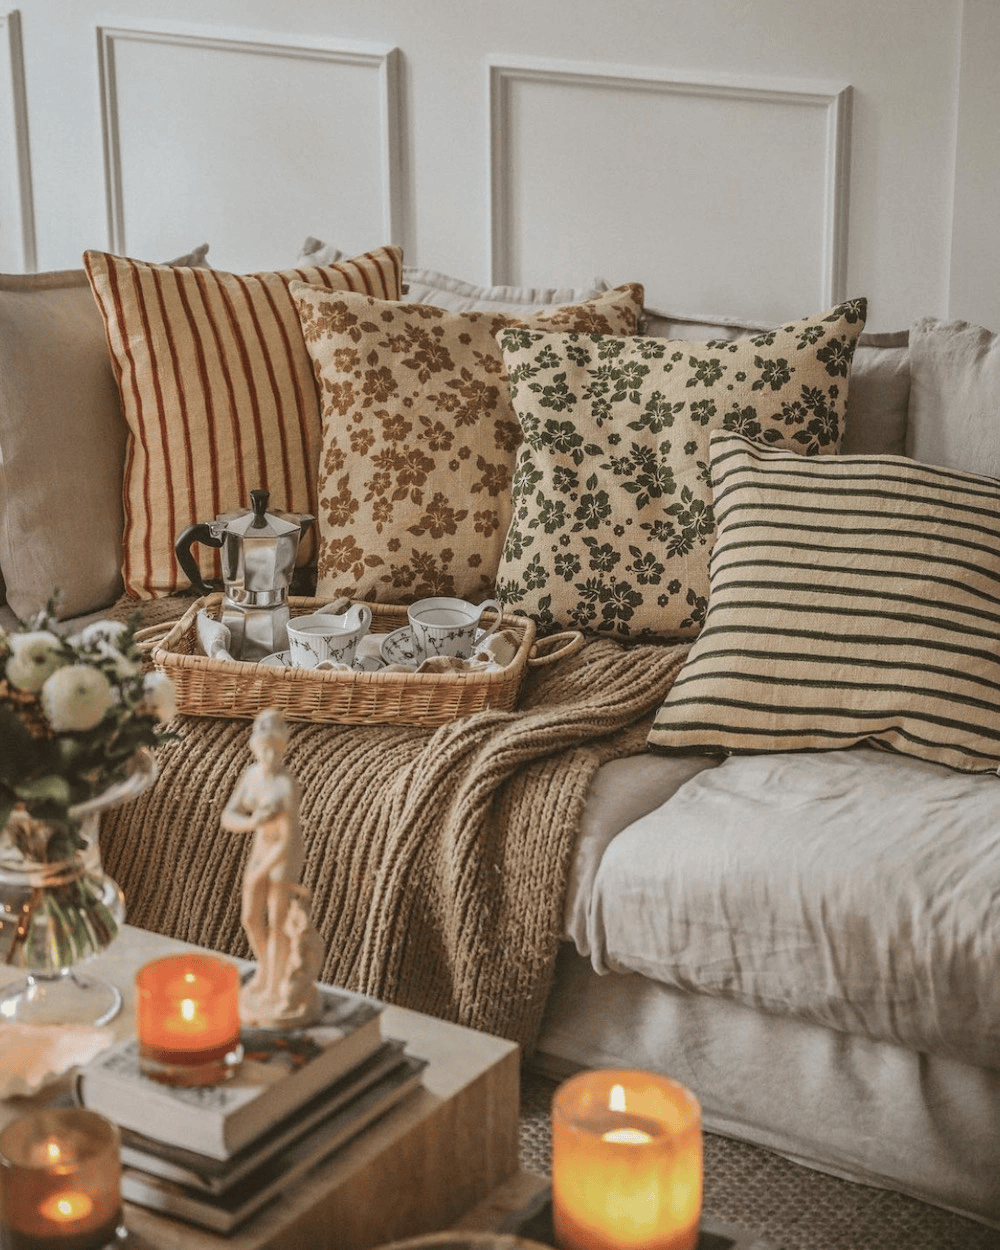 Summery beige pillows in floral and striped patterns